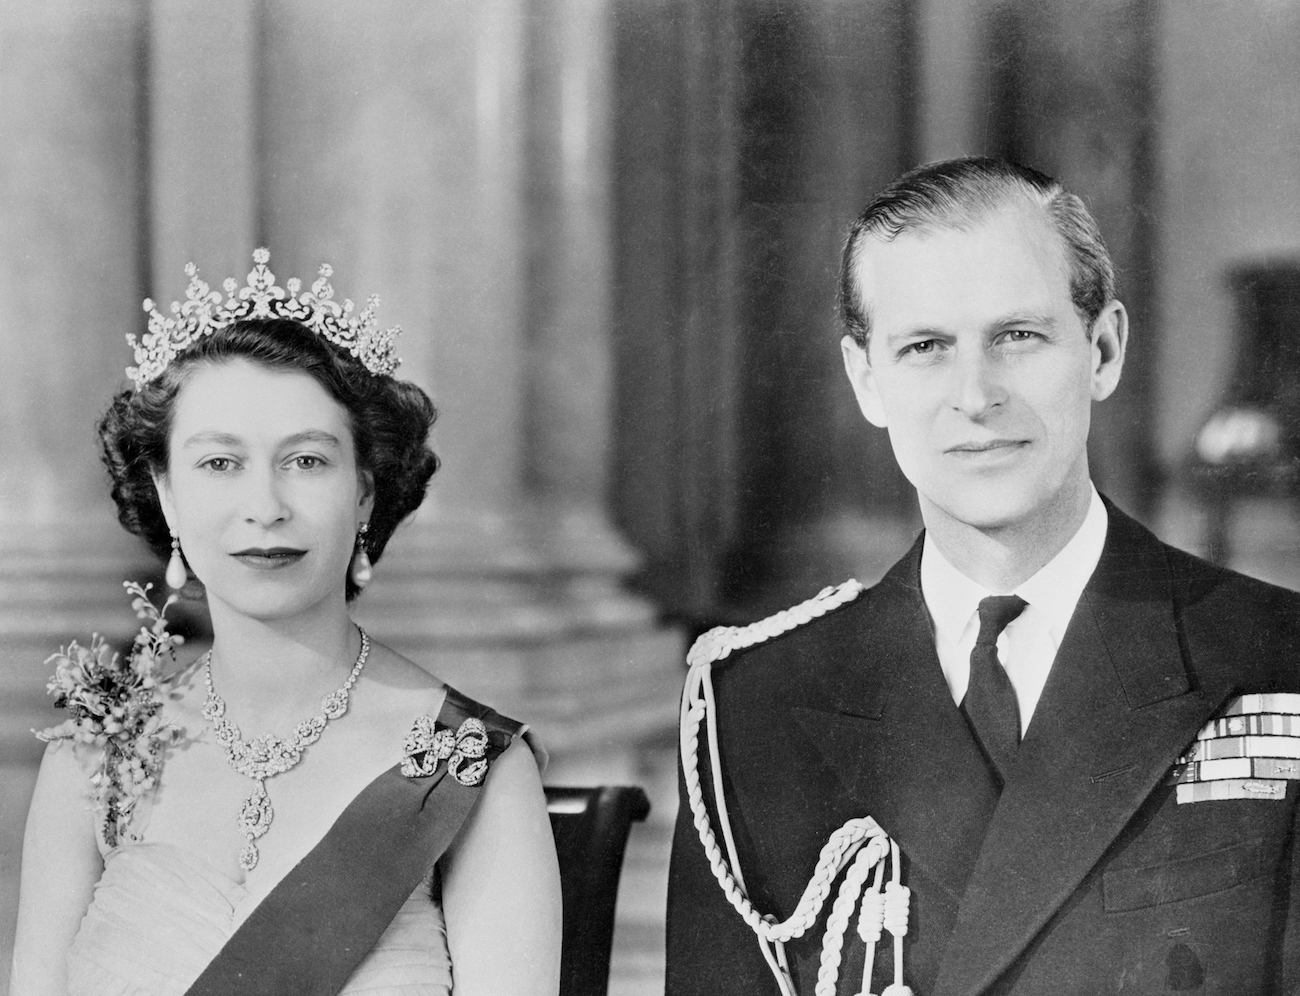 Prince Philip Gave Queen Elizabeth II a Hilarious Nickname With a Couple of Meanings